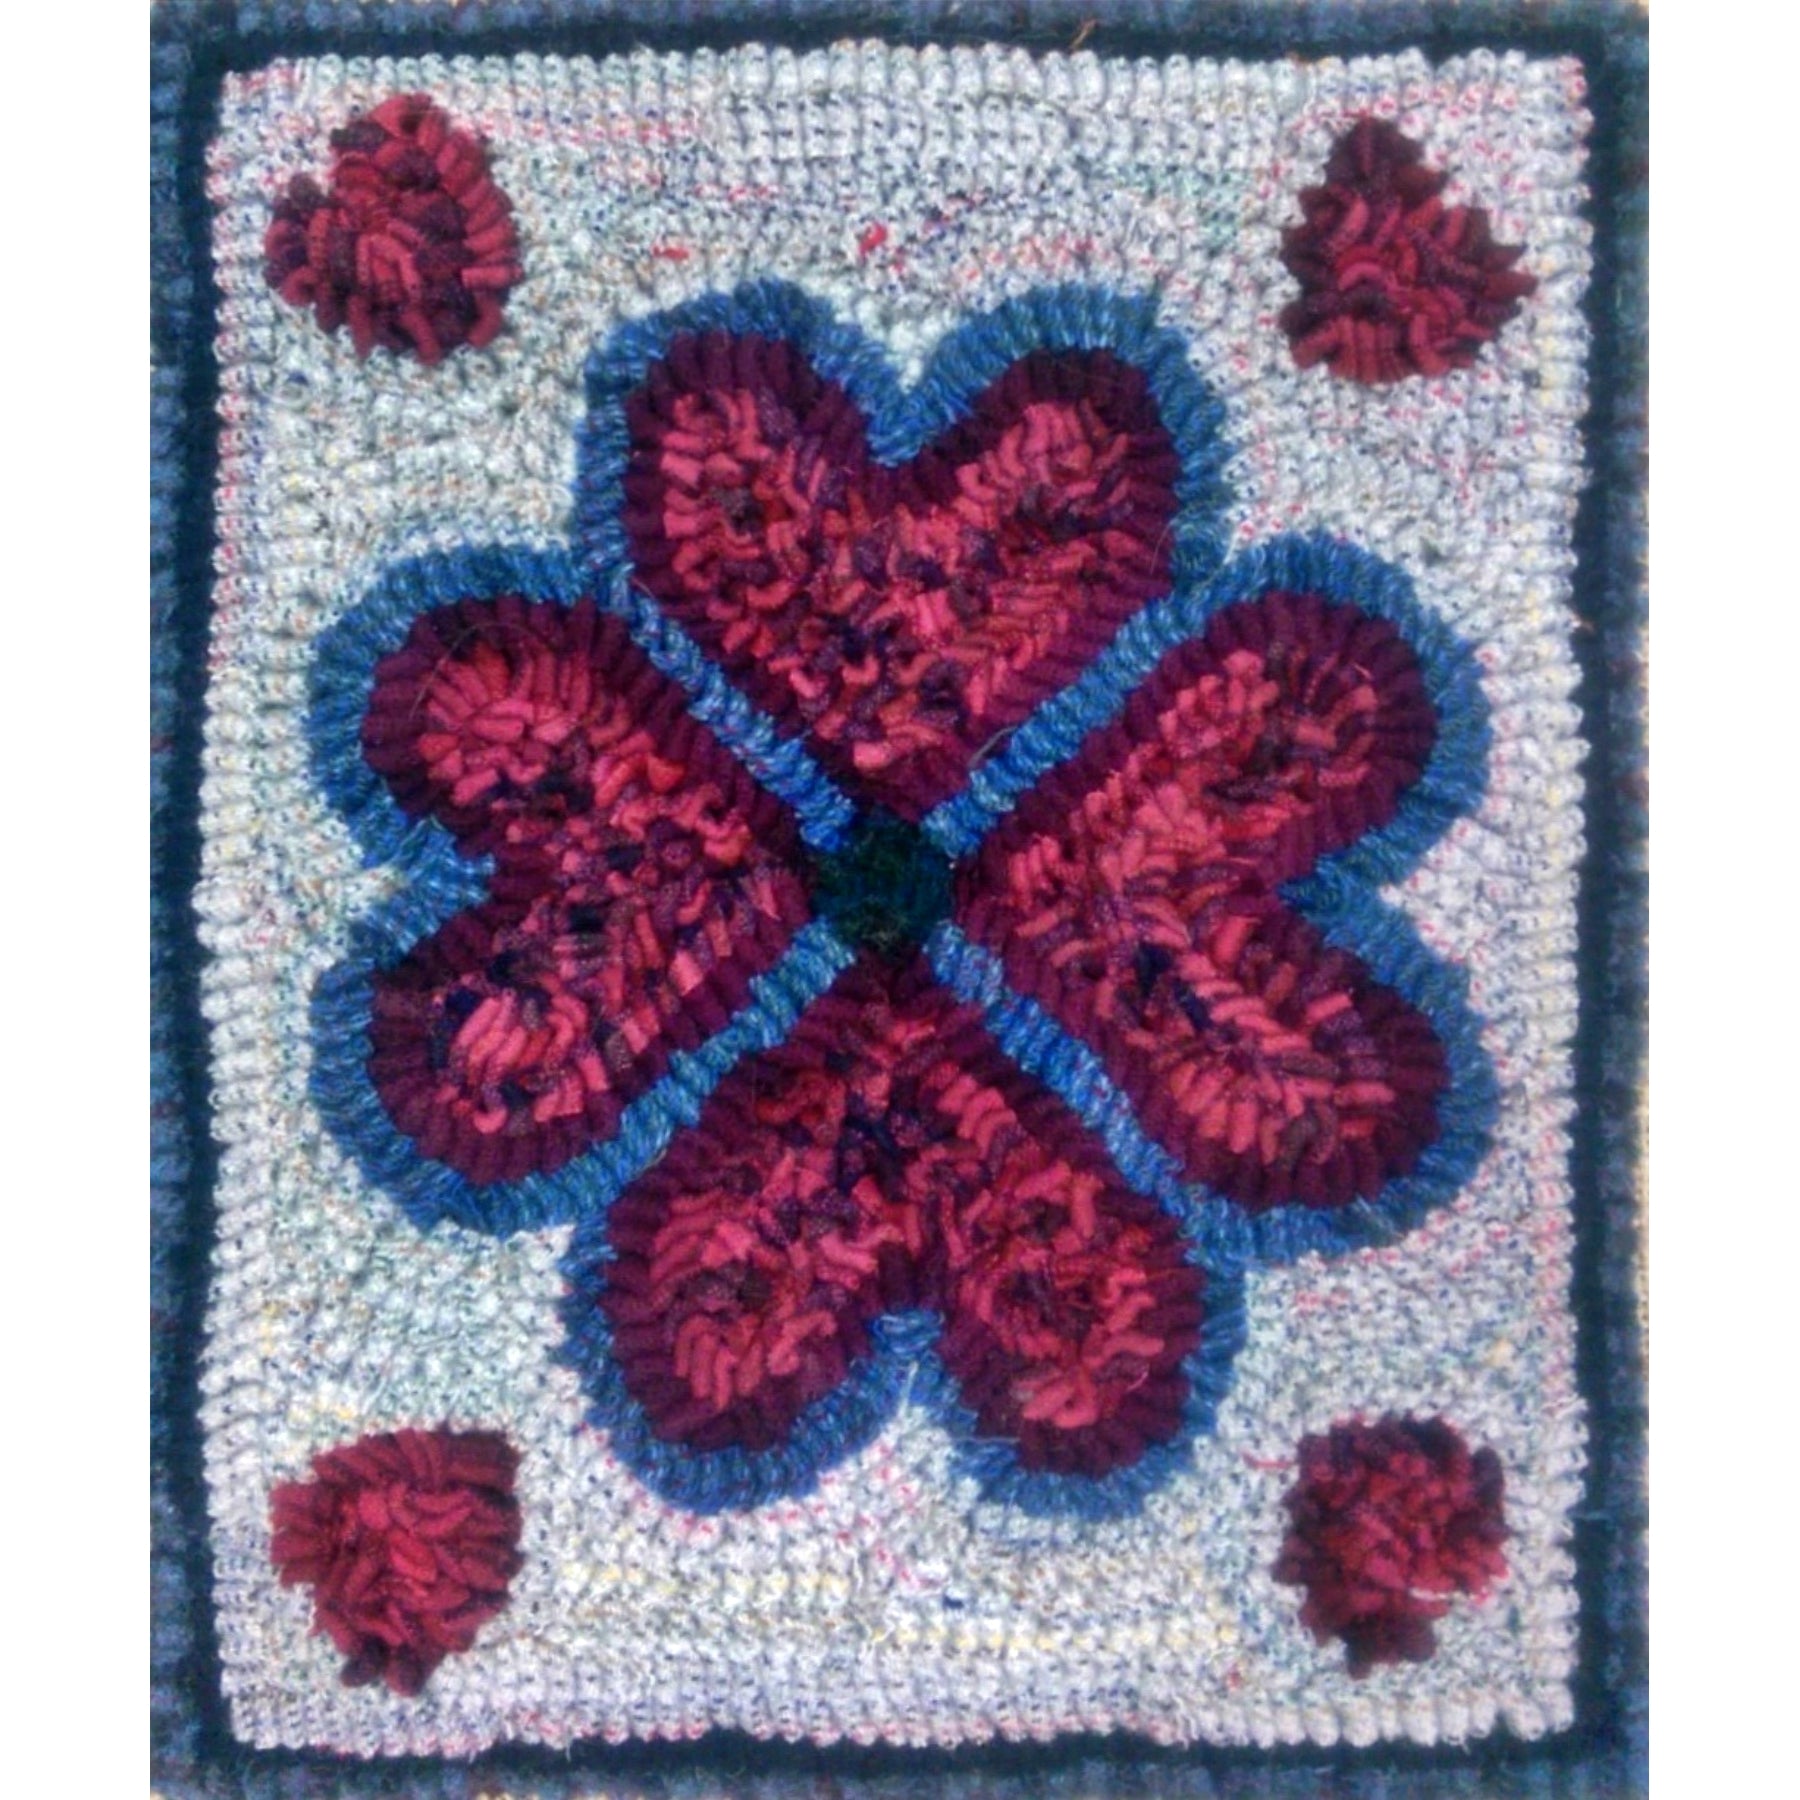 Floral Heart Quilt Square, rug hooked by Connie Bradley